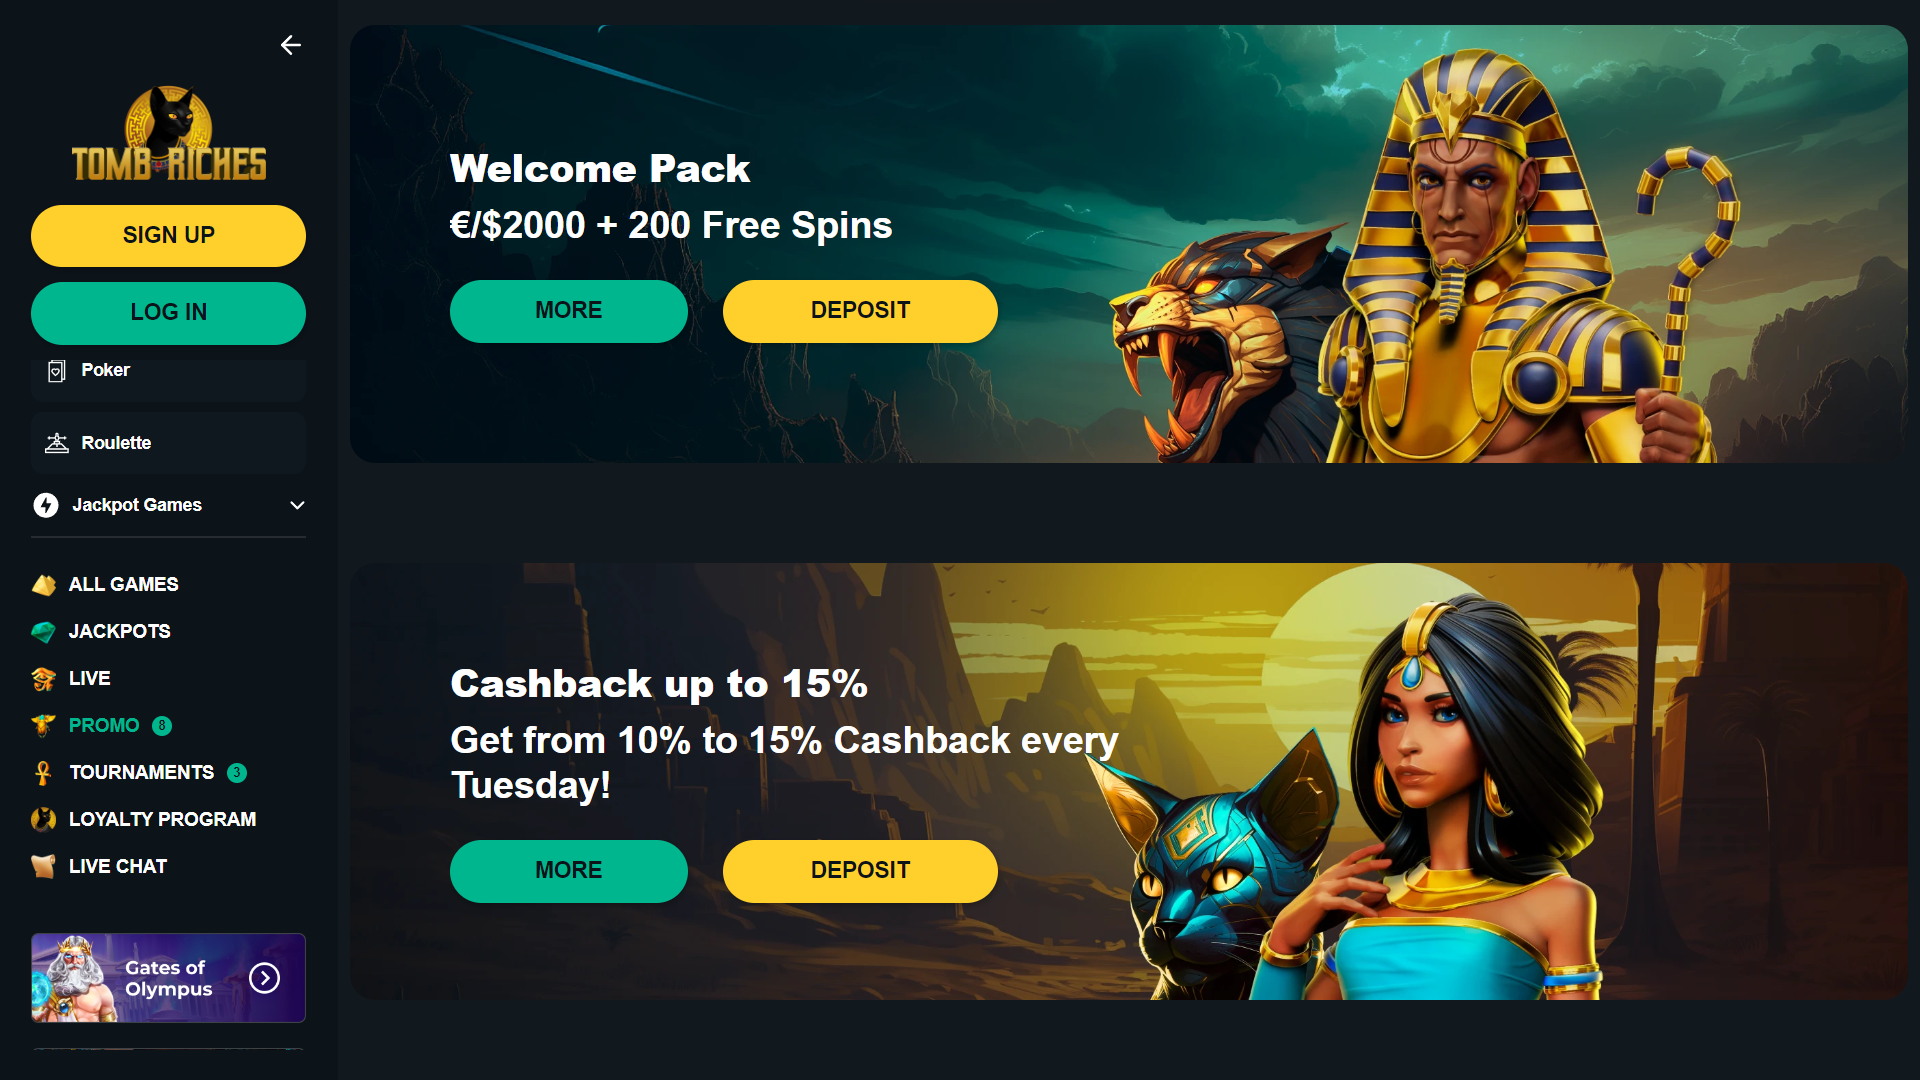 TombRiches Casino Promotions